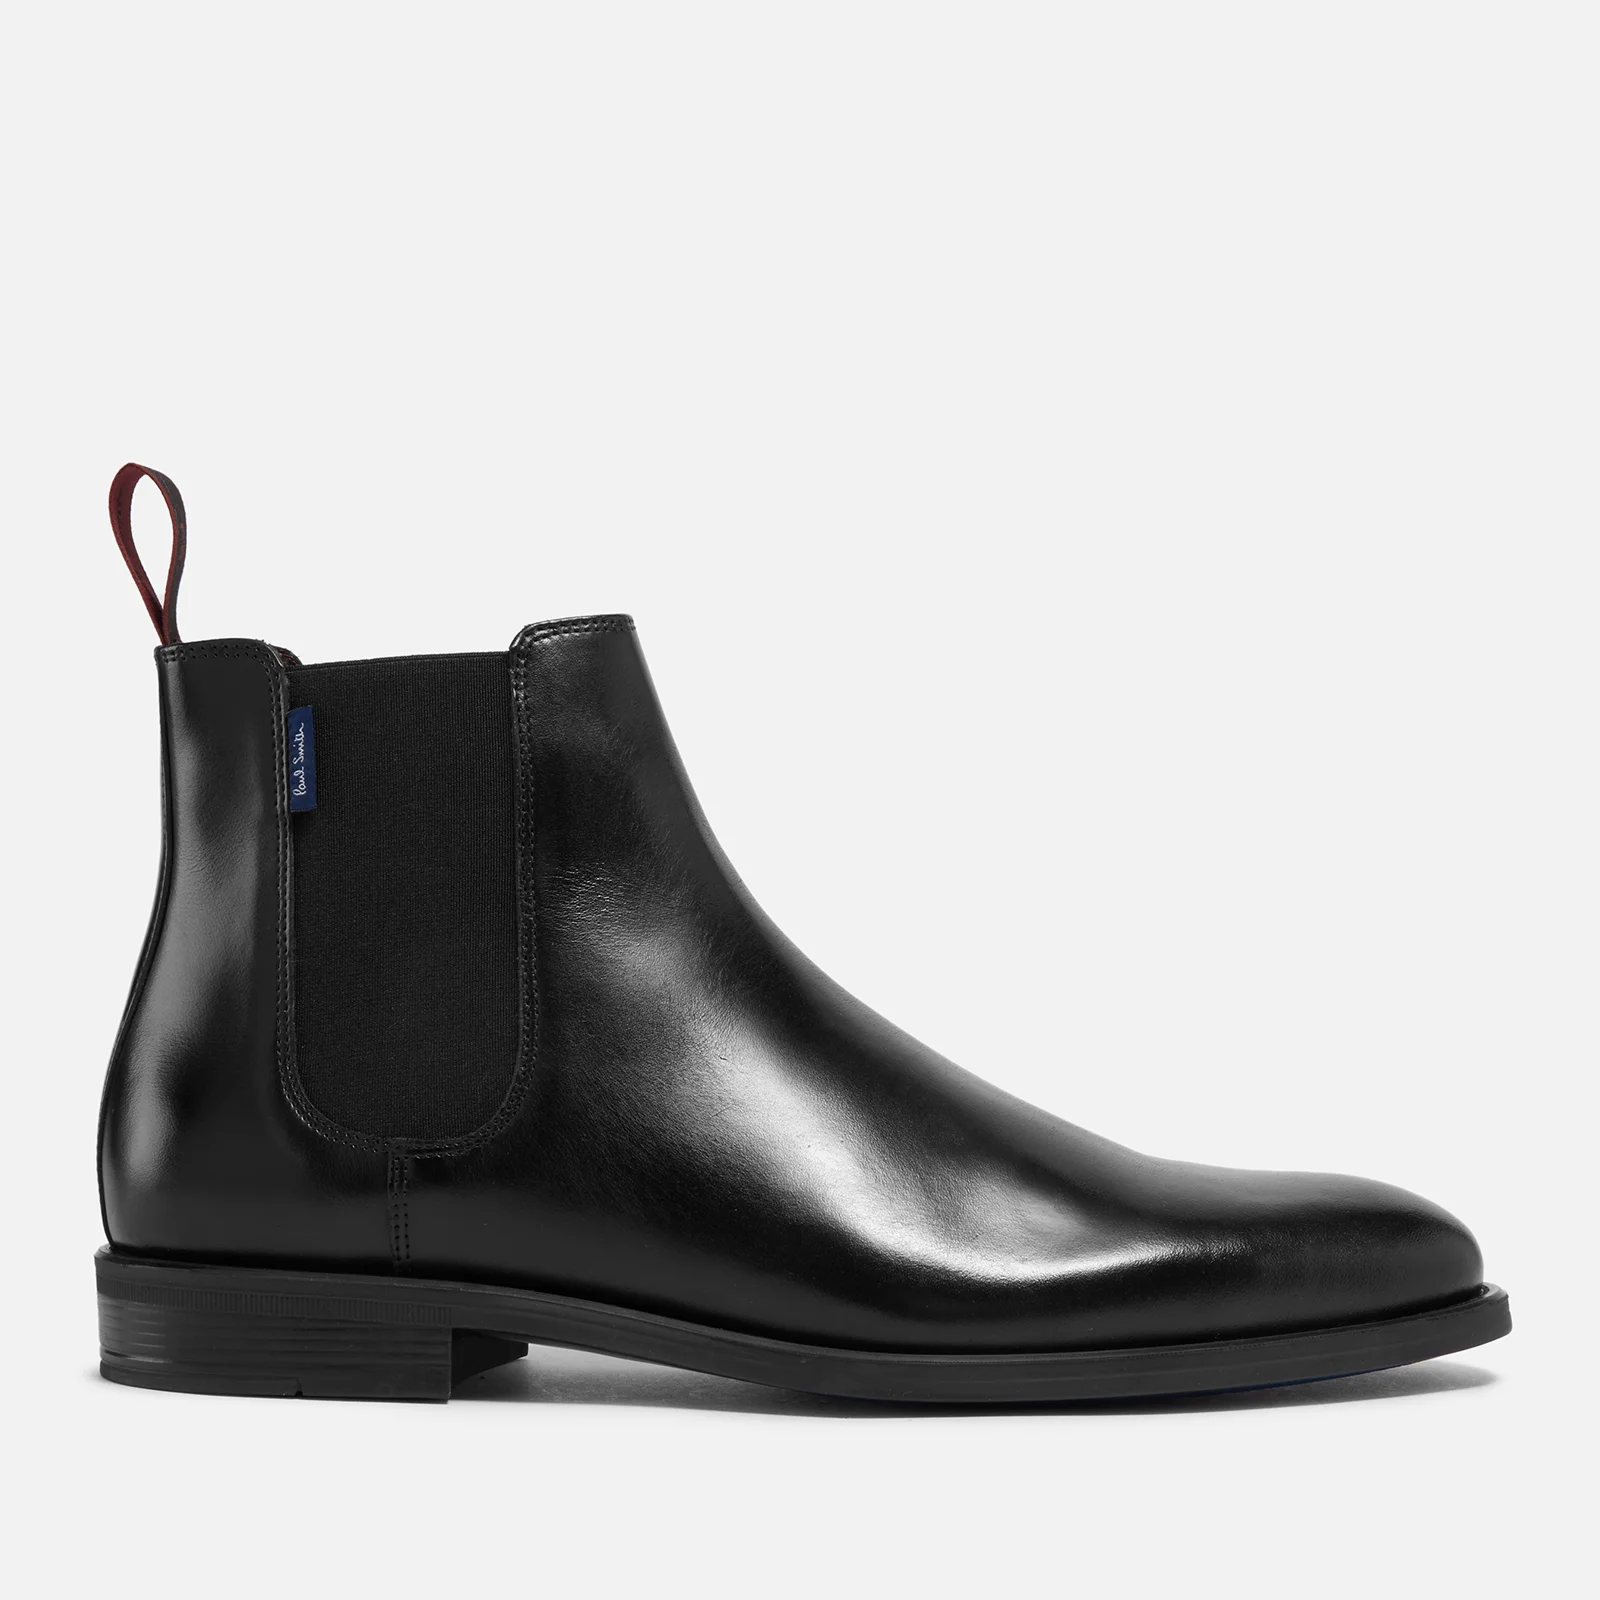 Paul Smith Cedric Leather Chelsea Boots Image 1